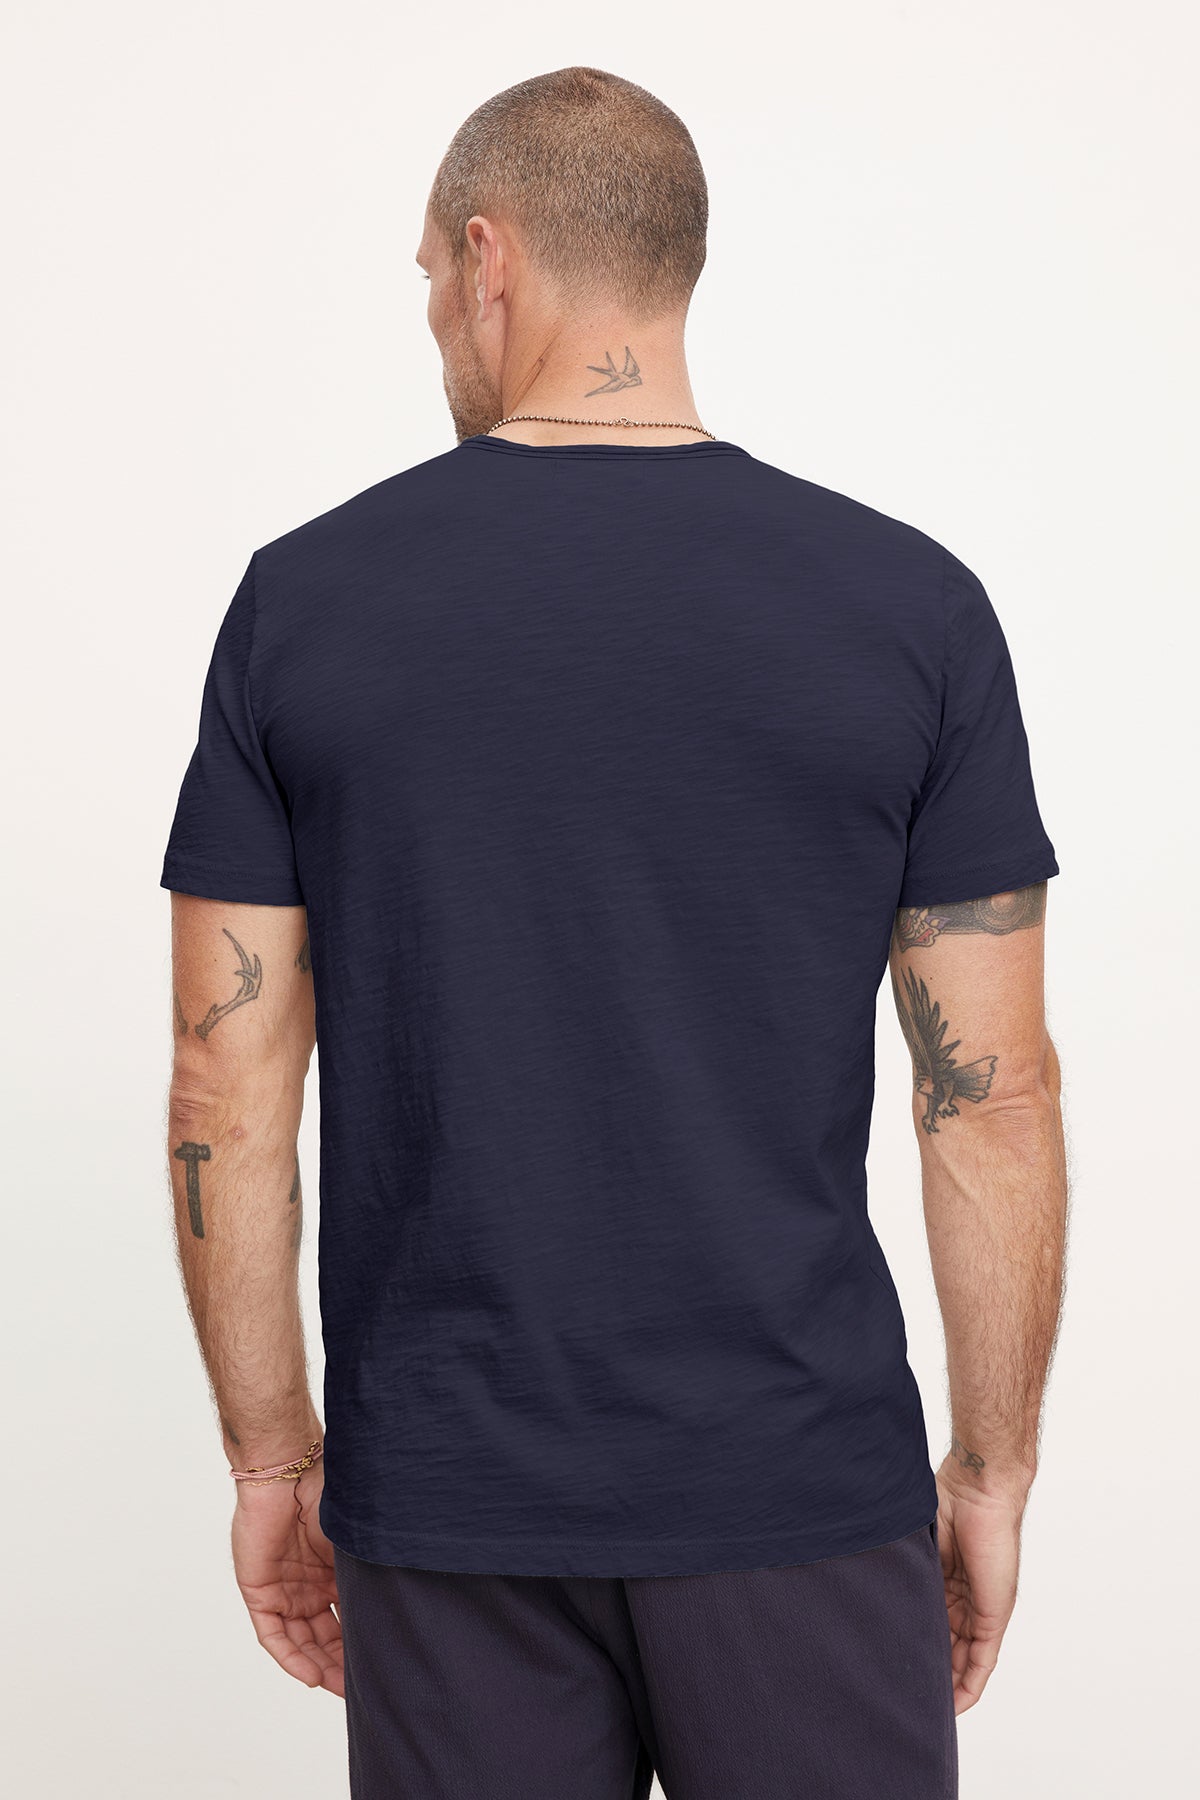 Rear view of a man wearing a Velvet by Graham & Spencer Chad Tee, displaying multiple arm tattoos and a neck tattoo.-36909363724481